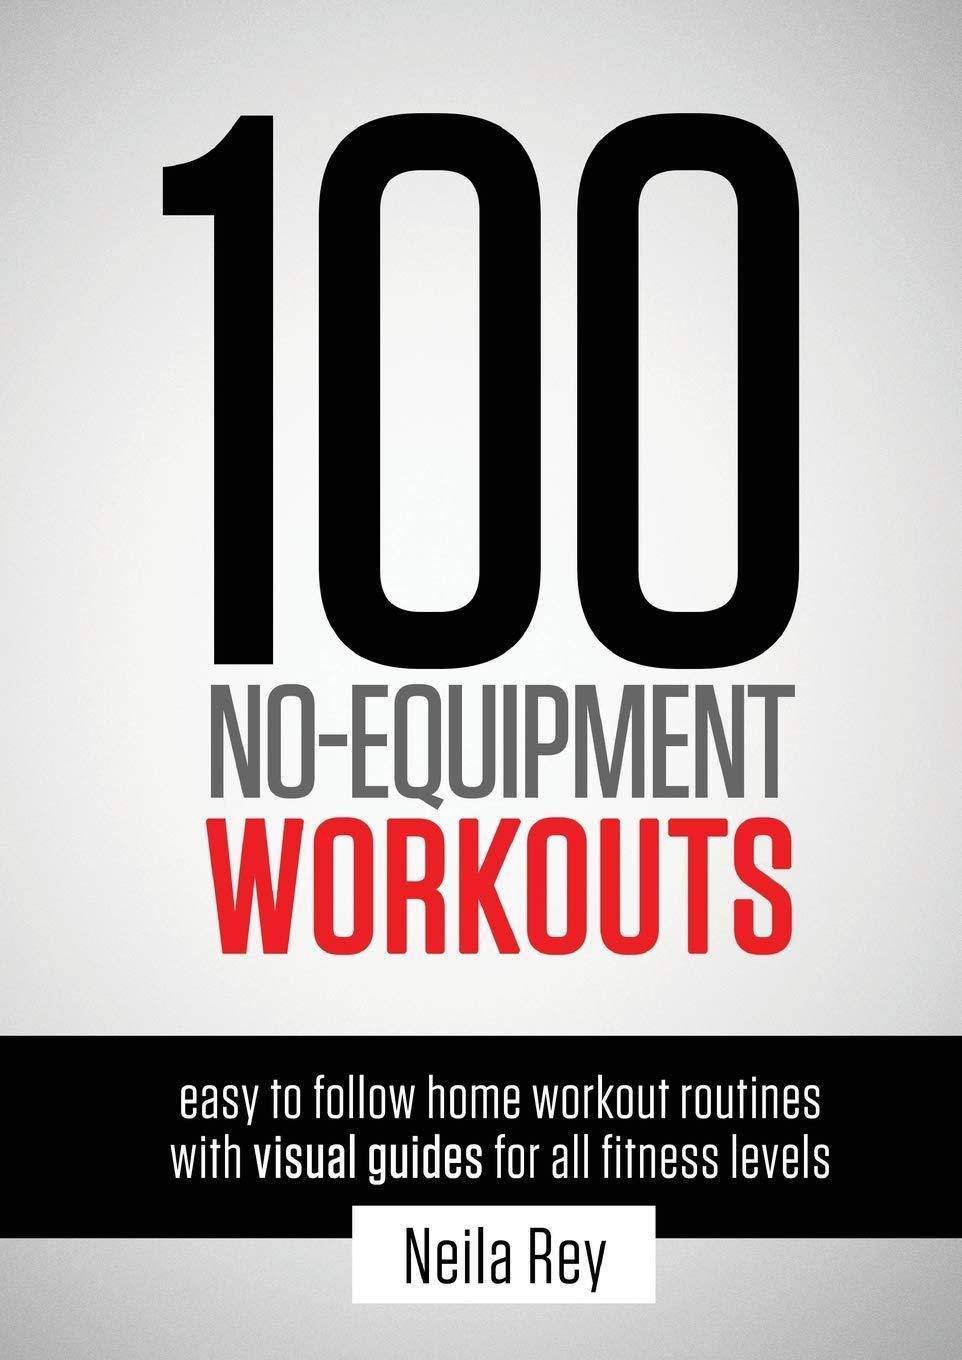 100 No-Equipment Workouts Vol. 1: Fitness Routines you can do an - SureShot Books Publishing LLC